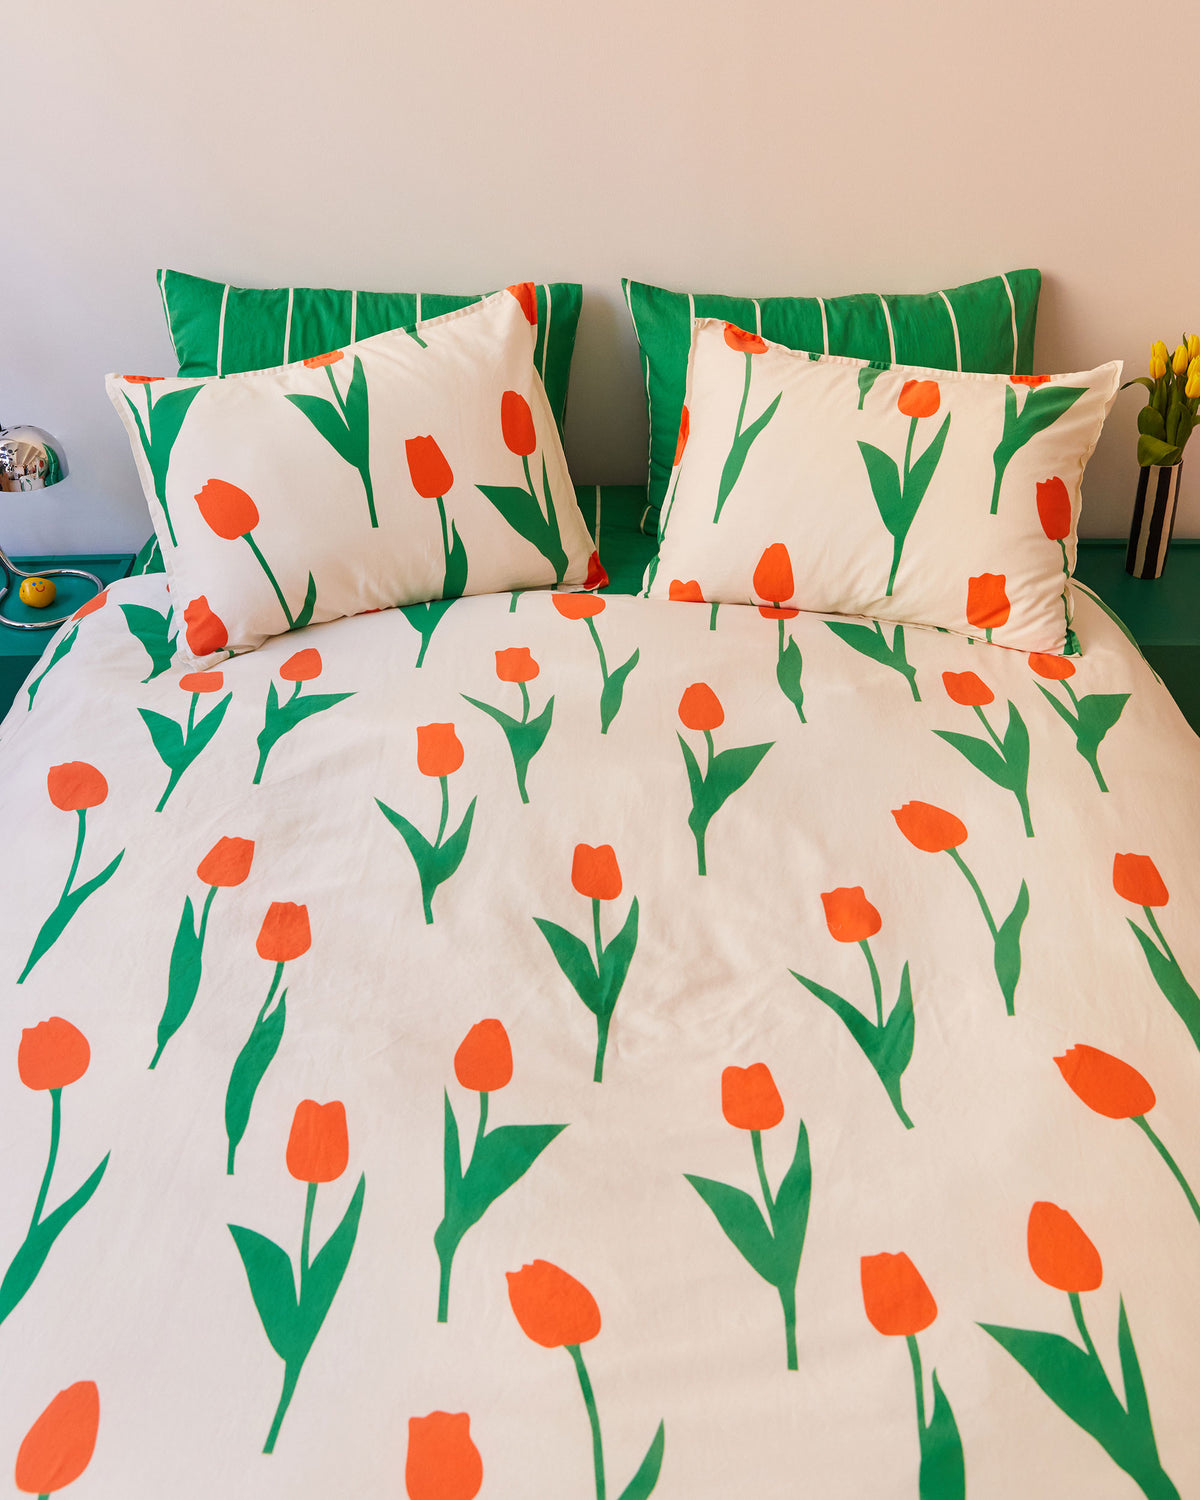 Dusen Dusen Tulip Duvet Set. Duvet cover in cream with red and green Tulip print. 100% cotton sateen, 300 thread count. Machine wash cold and tumble dry. Made in Portugal. Our cotton sateen is smooth and cool to the touch and features a slightly lustrous finish.